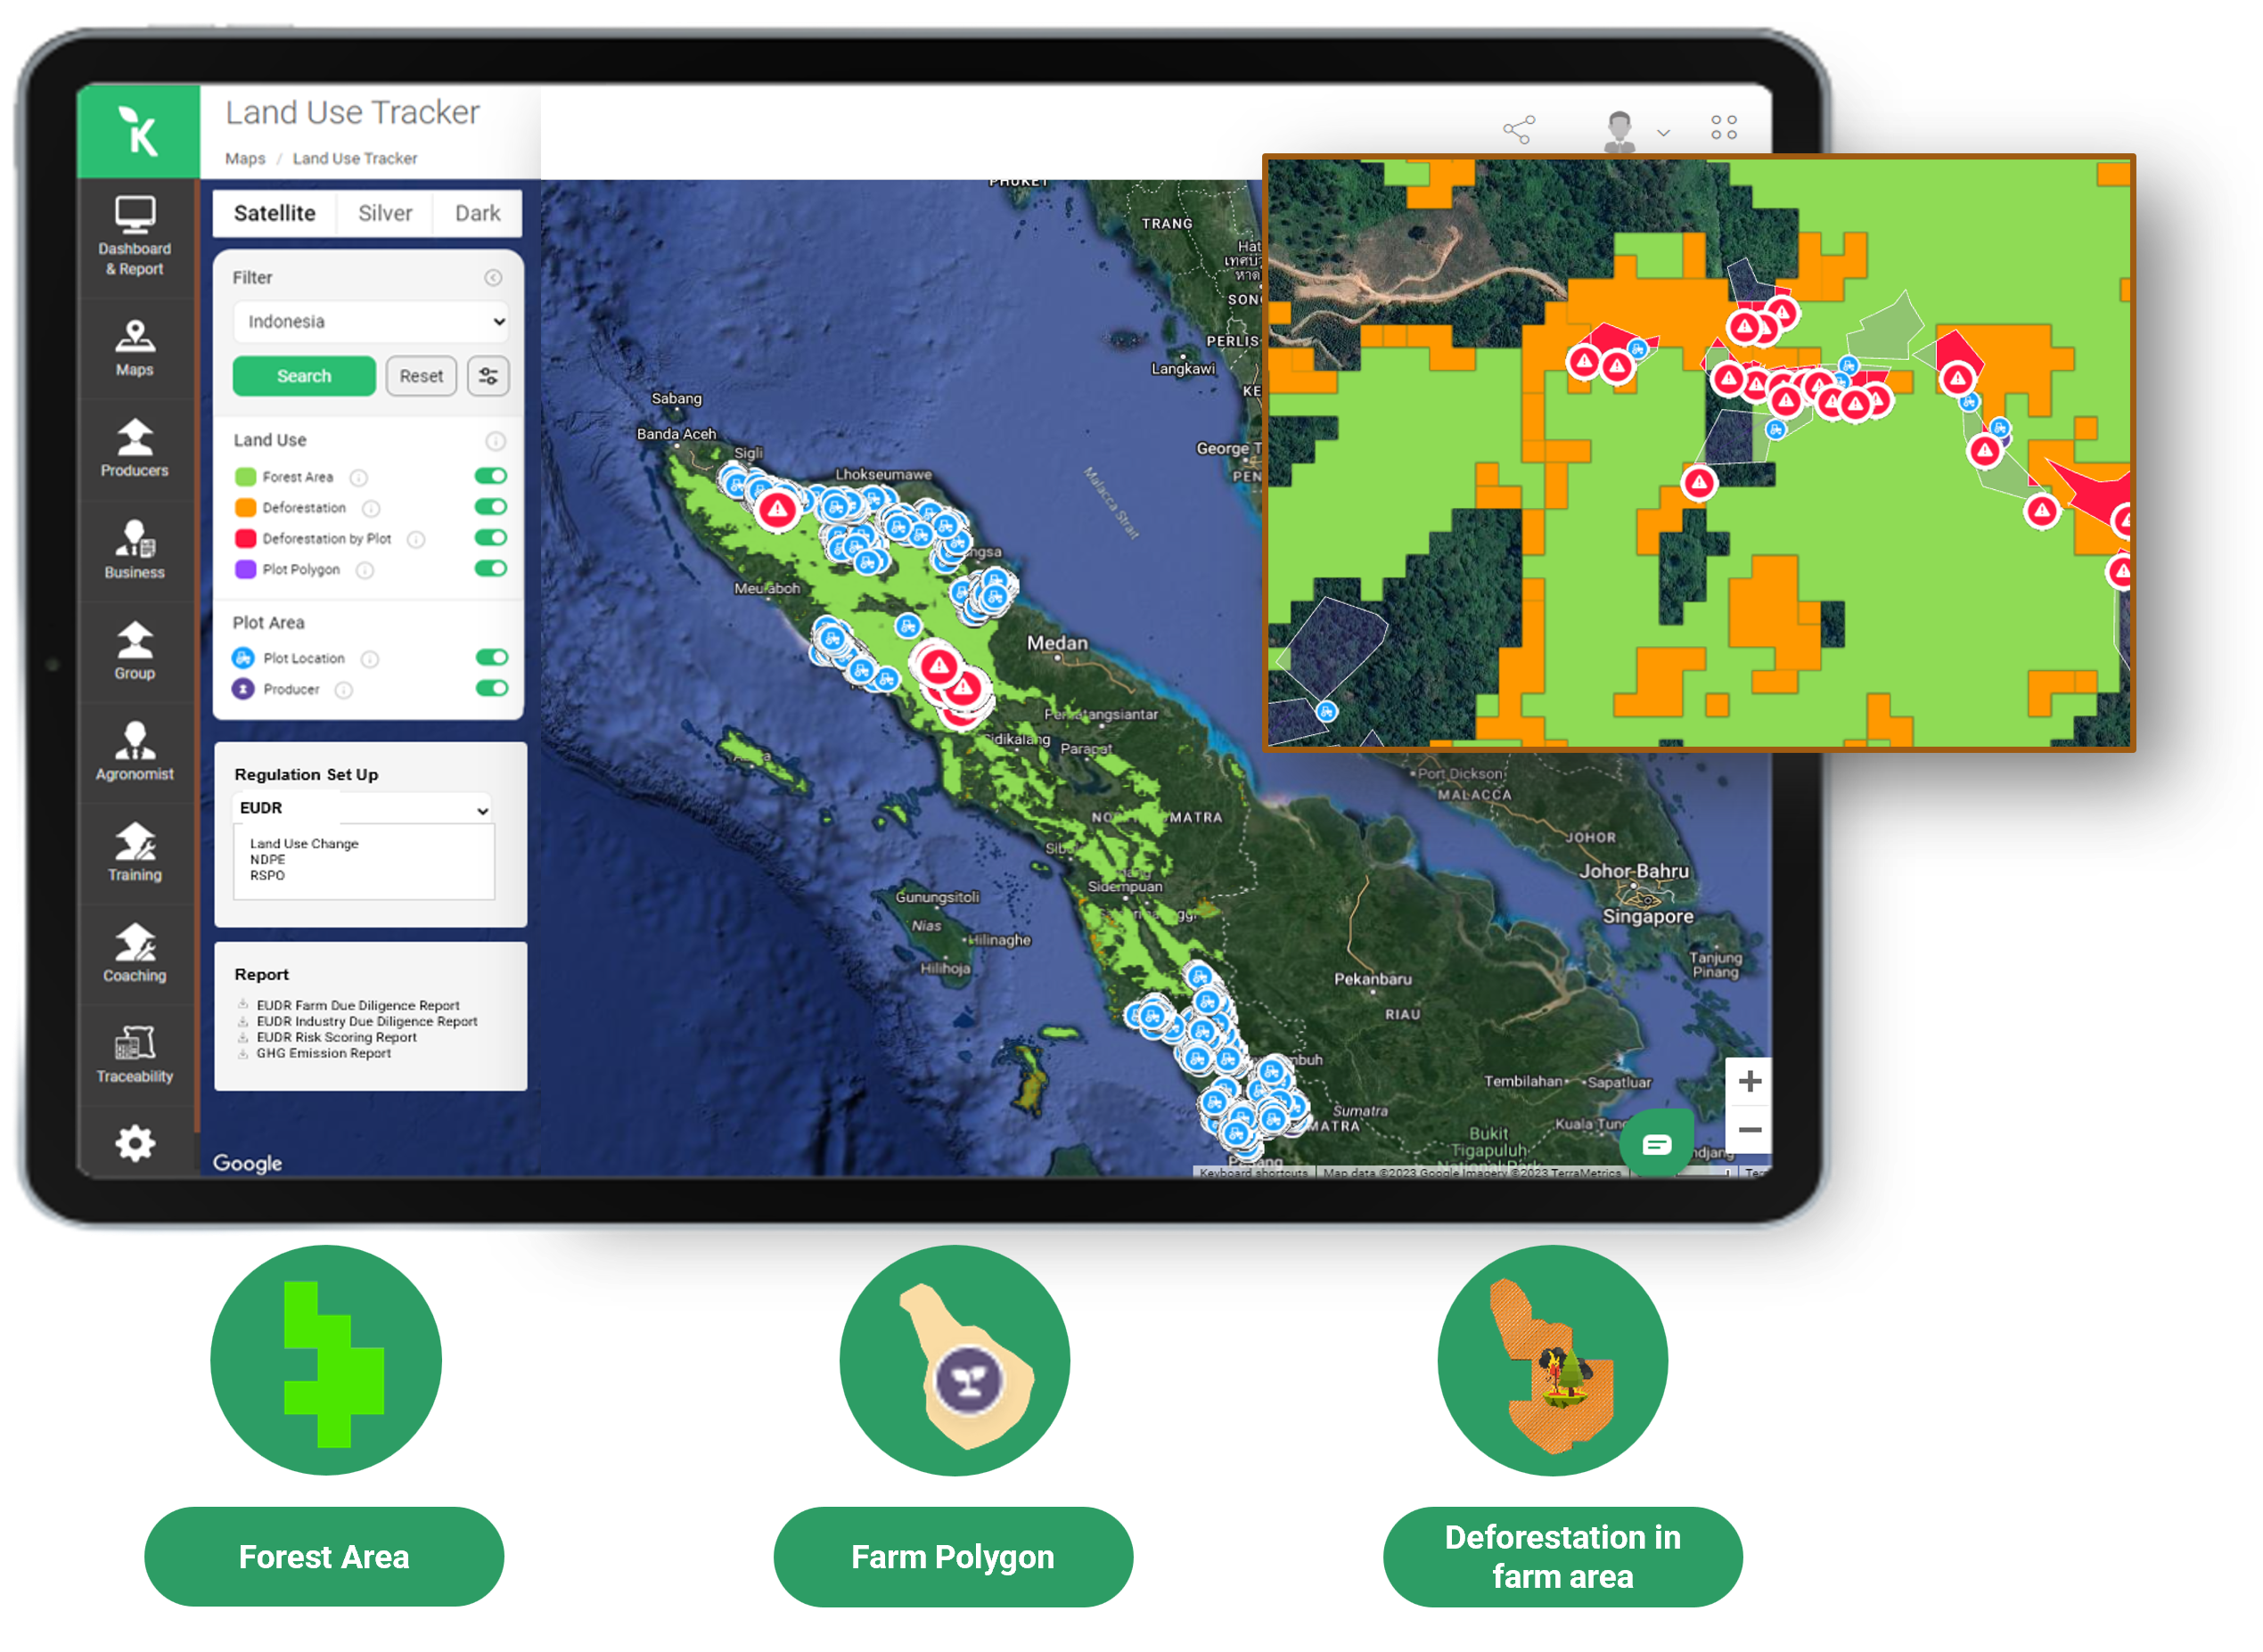 02. Land Use Tracker feature accomodates deforestation cut-off dates and tree cover loss information, allowing users to analyze deforestation trends